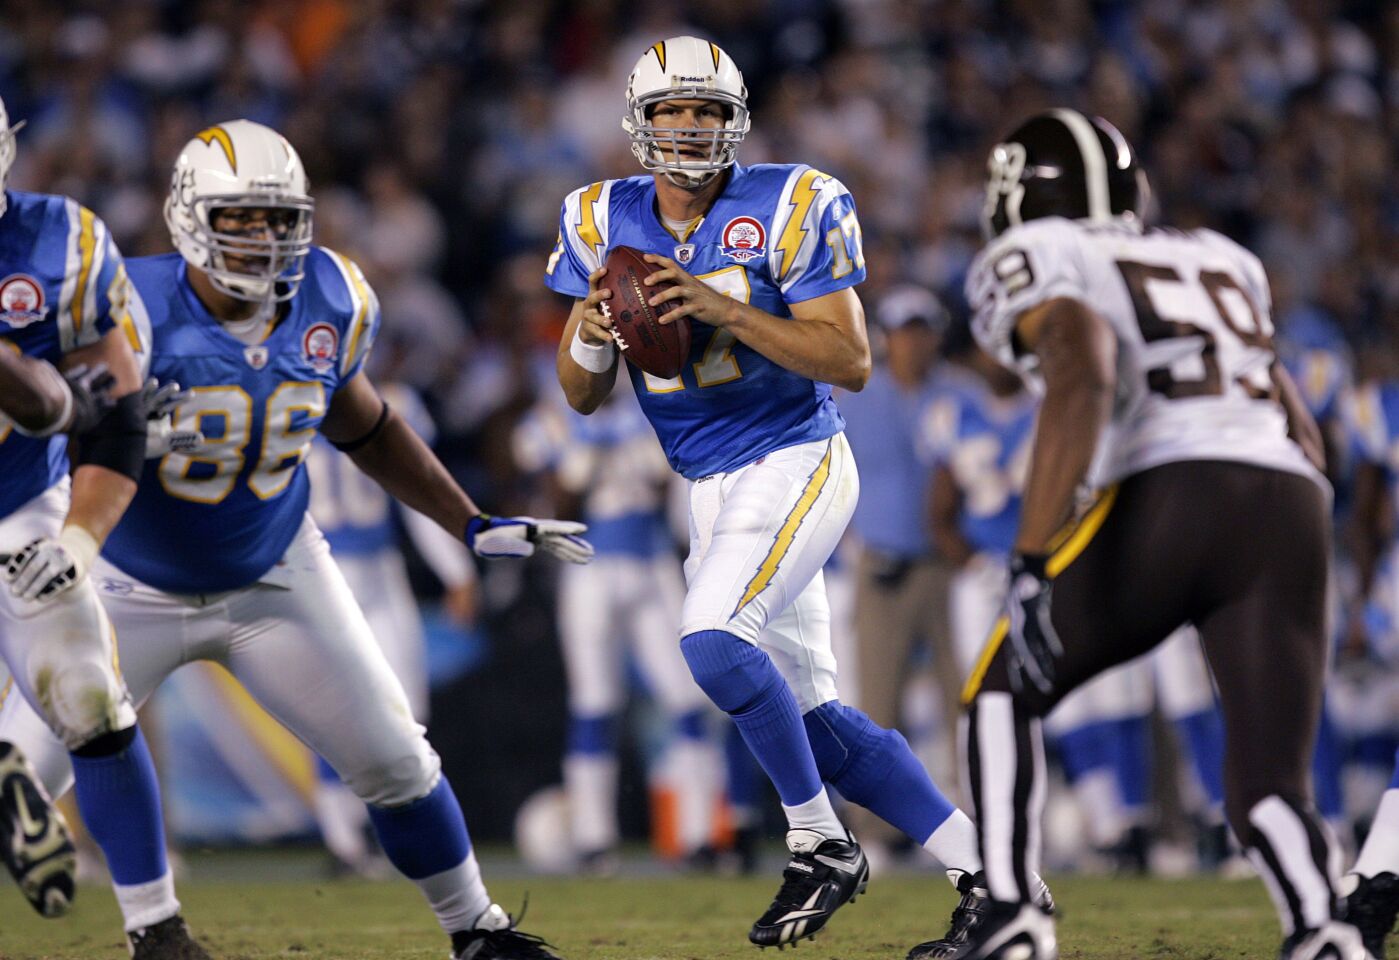 Charger's Philip Rivers drops back to pass in the 2nd quarter against the Broncos on Oct. 19, 2009.